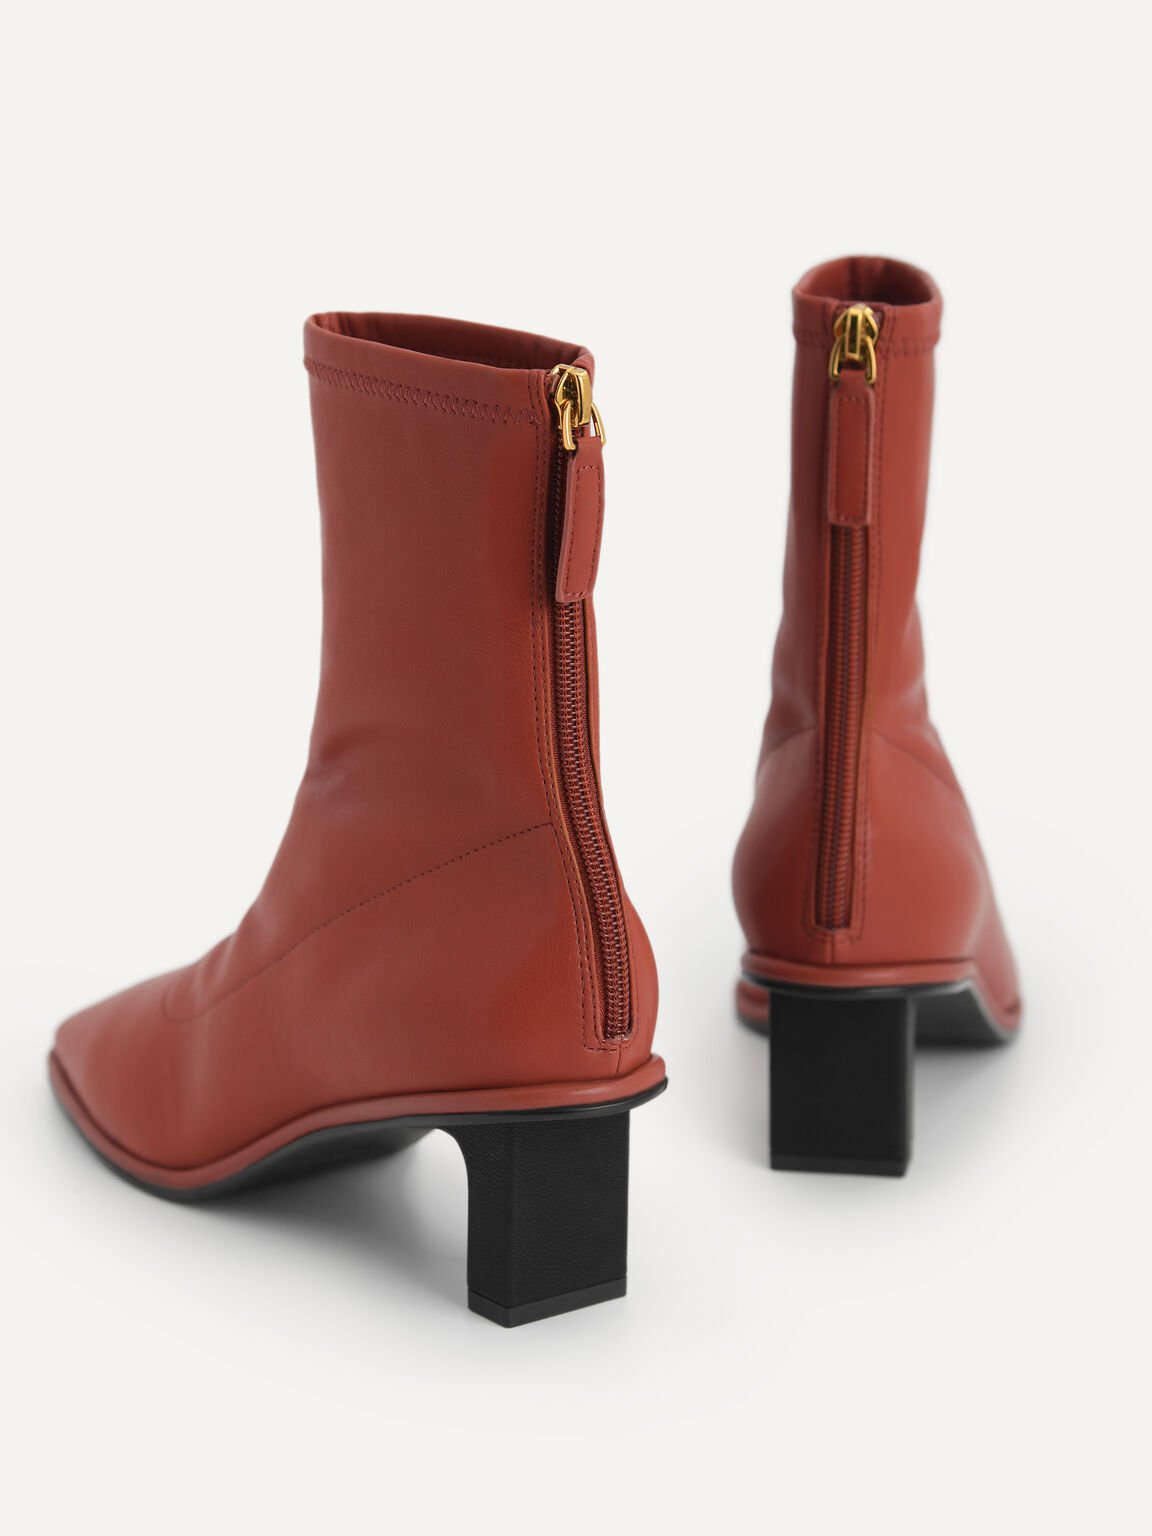 Heeled Ankle Boots, Brick, hi-res